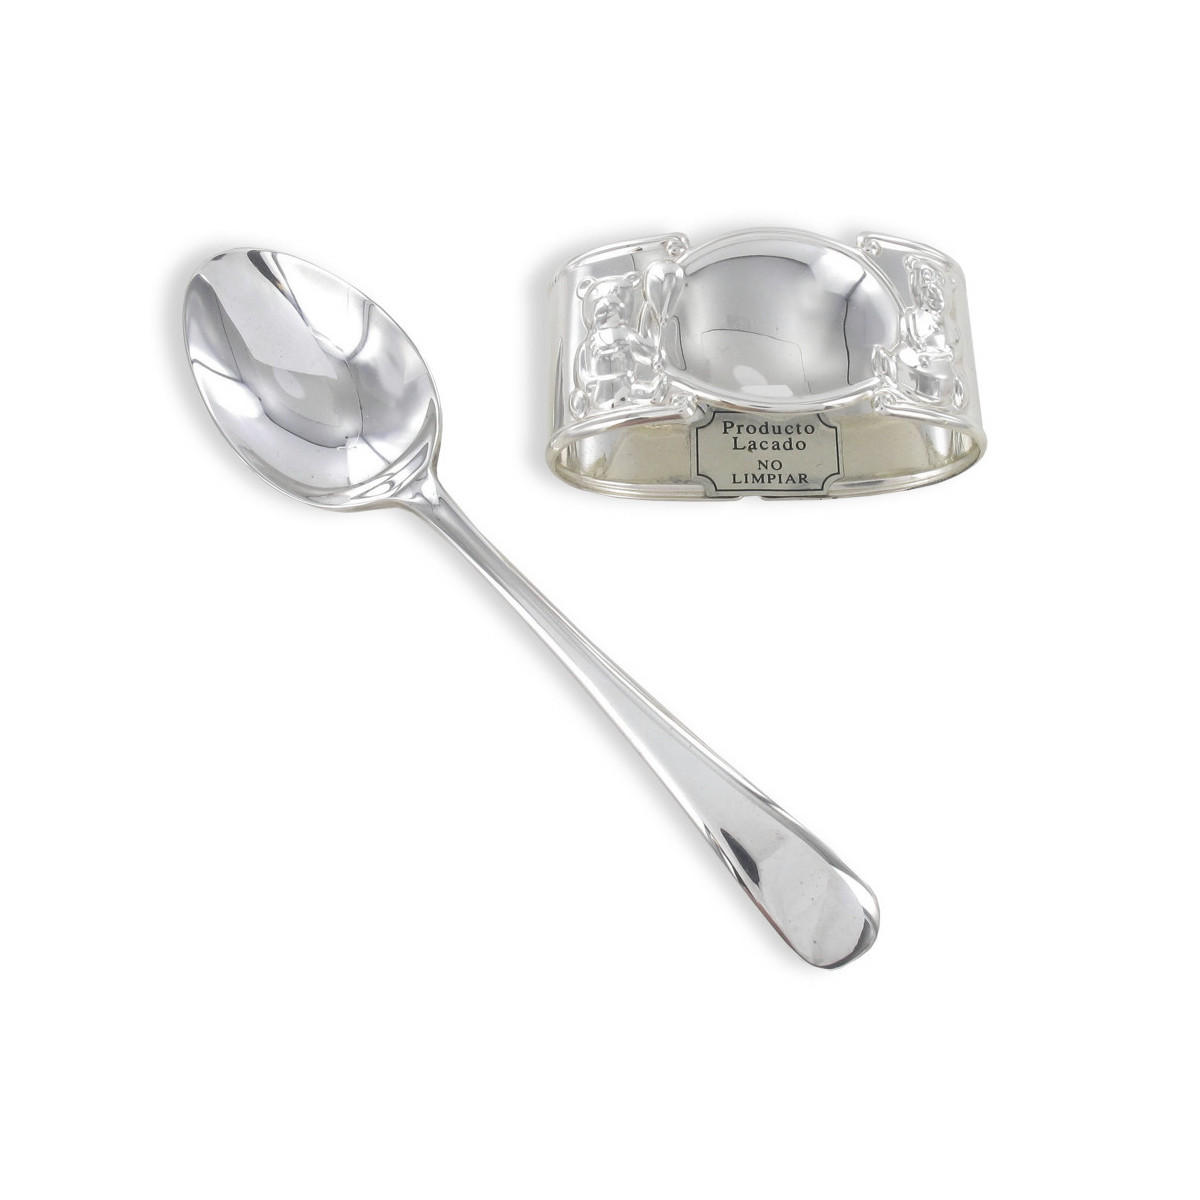 SILVER NAPKIN HOLDER AND SPOON